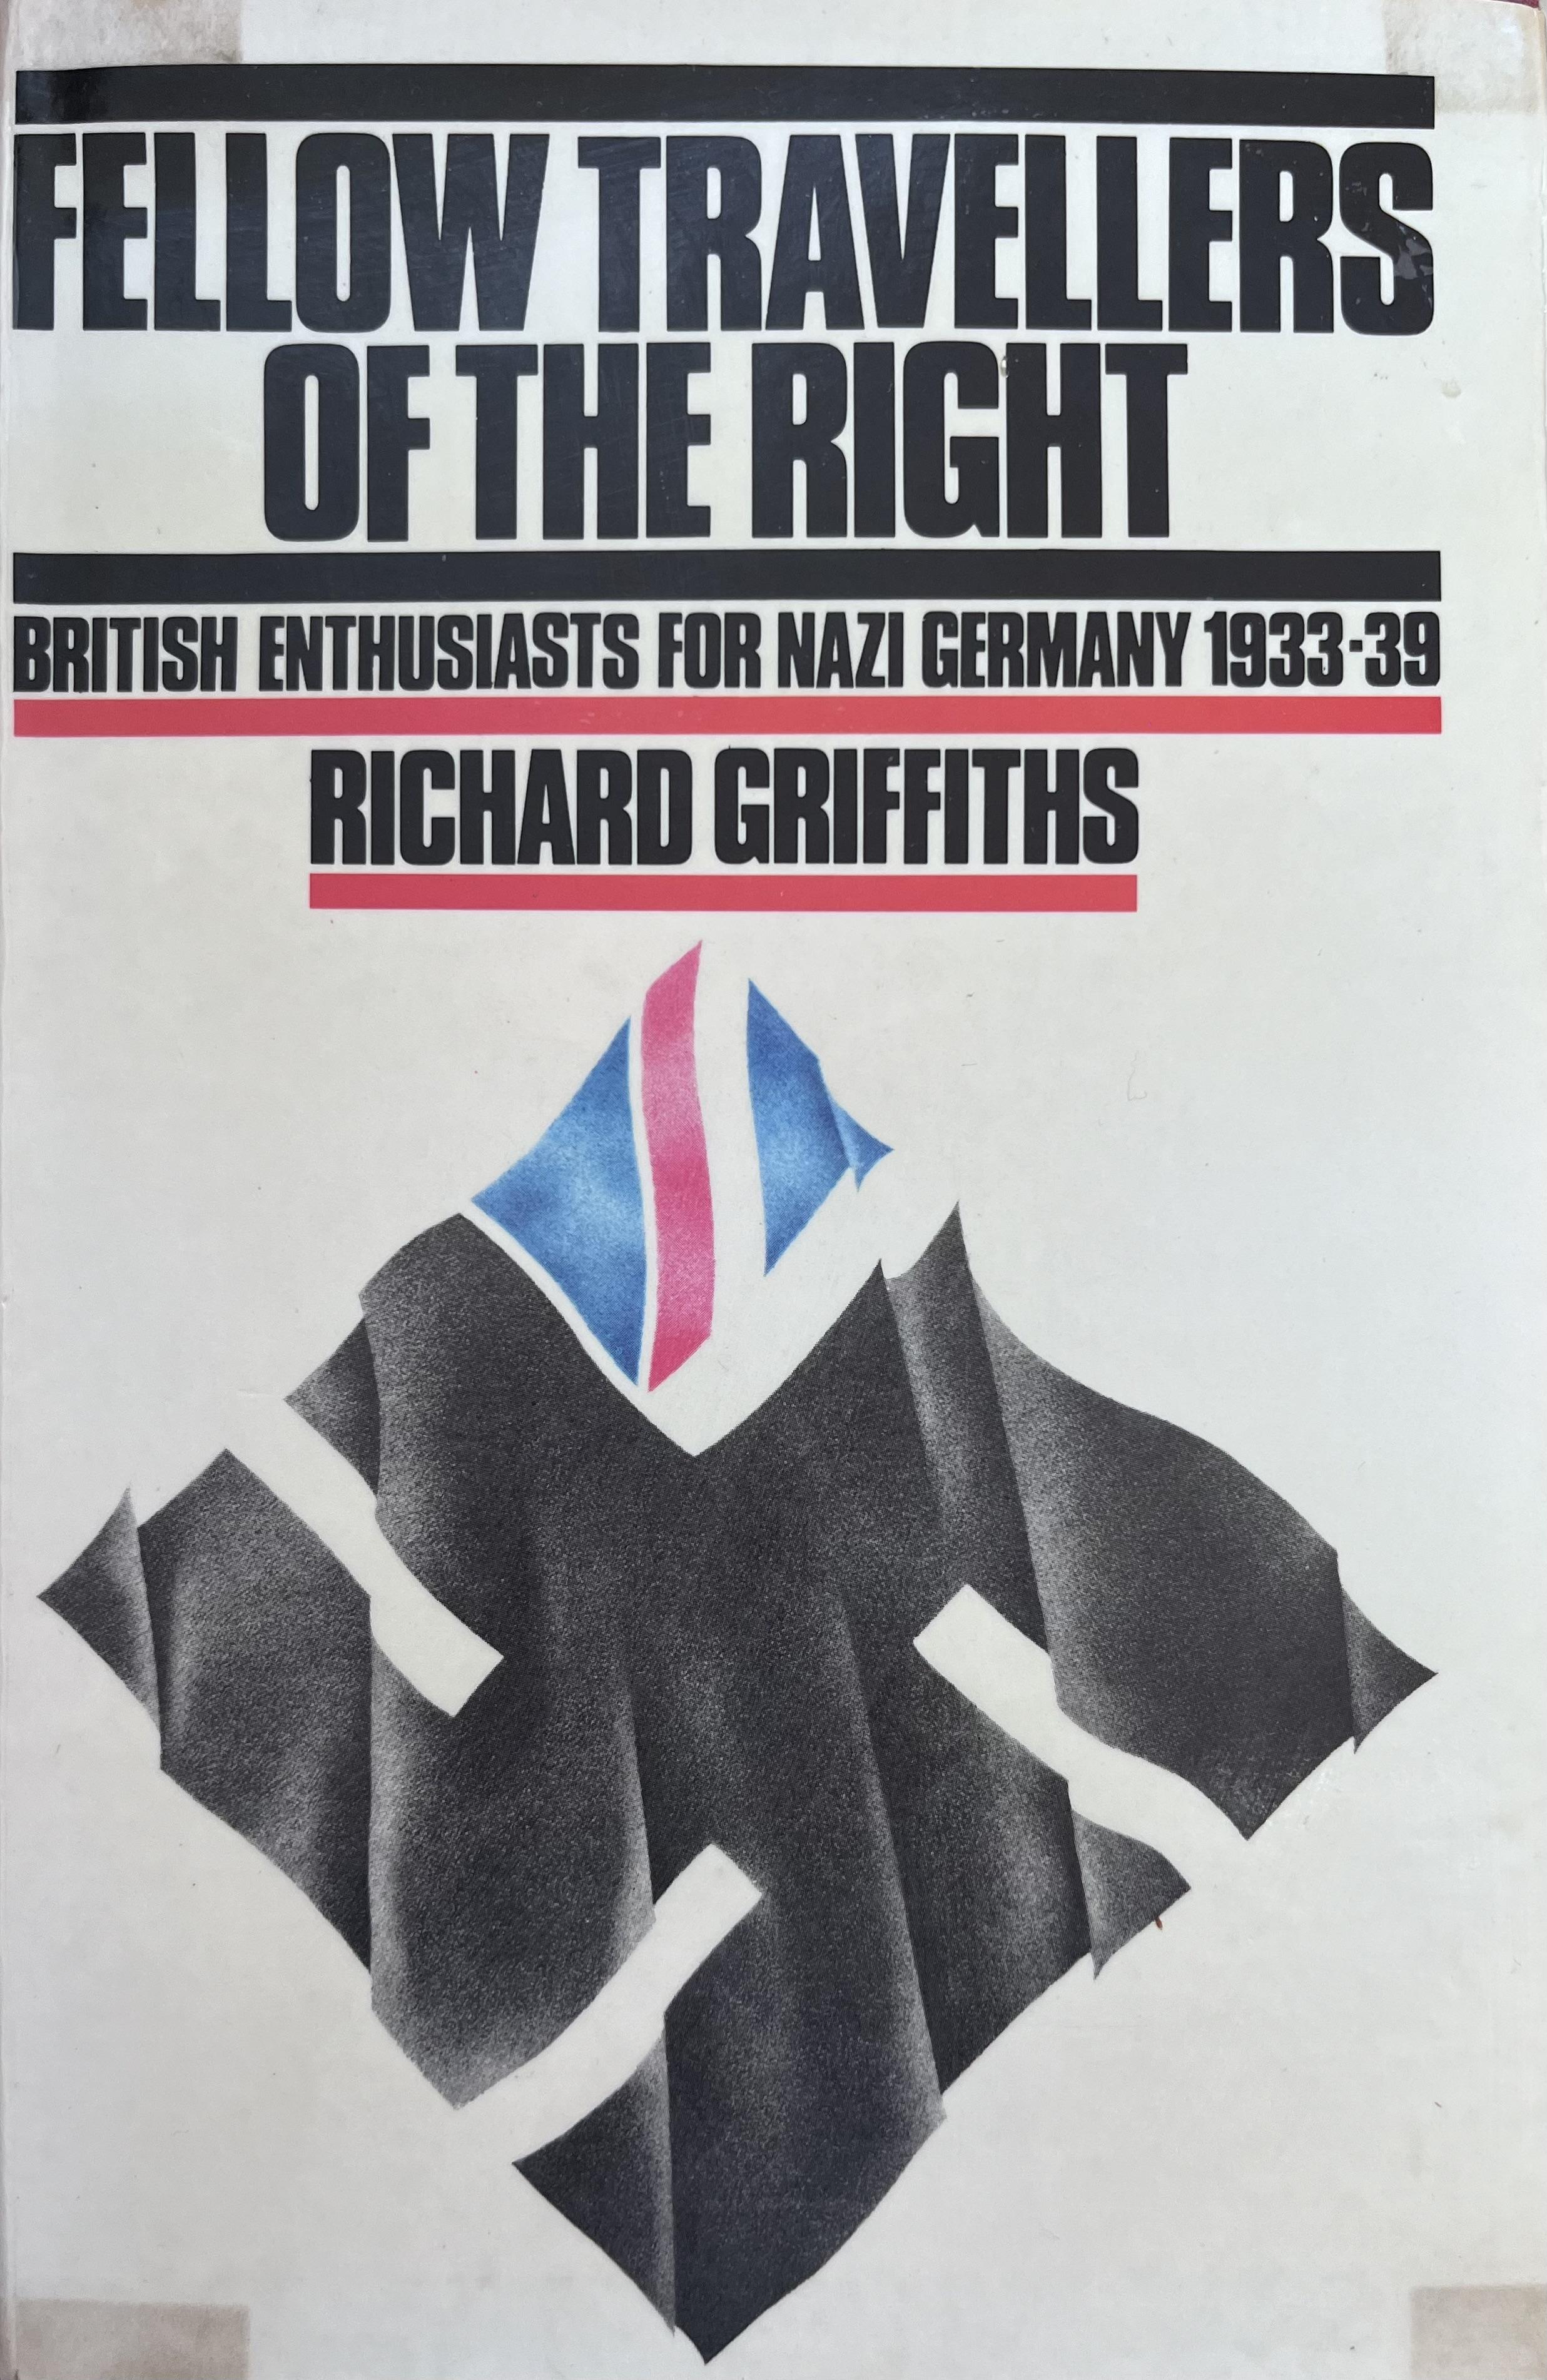 Fellow Travellers of the Right: British Enthusiasts for Nazi Germany, 1933-9 - Richard Griffiths